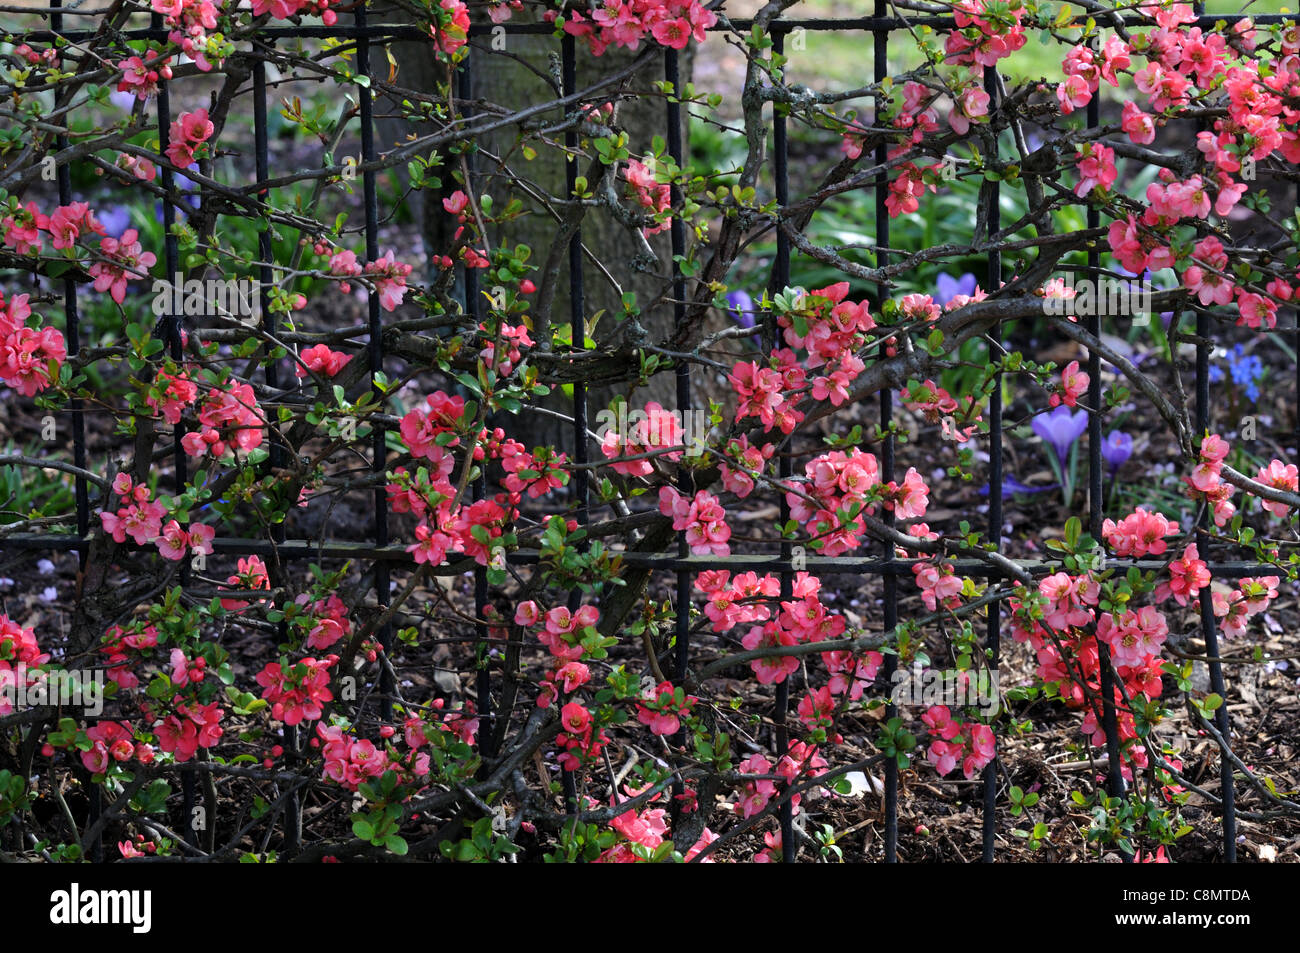 Flowering quince Chaenomeles x superba pink lady cultivar shrub red flowers spring flower bloom blossom train trained fence grow Stock Photo